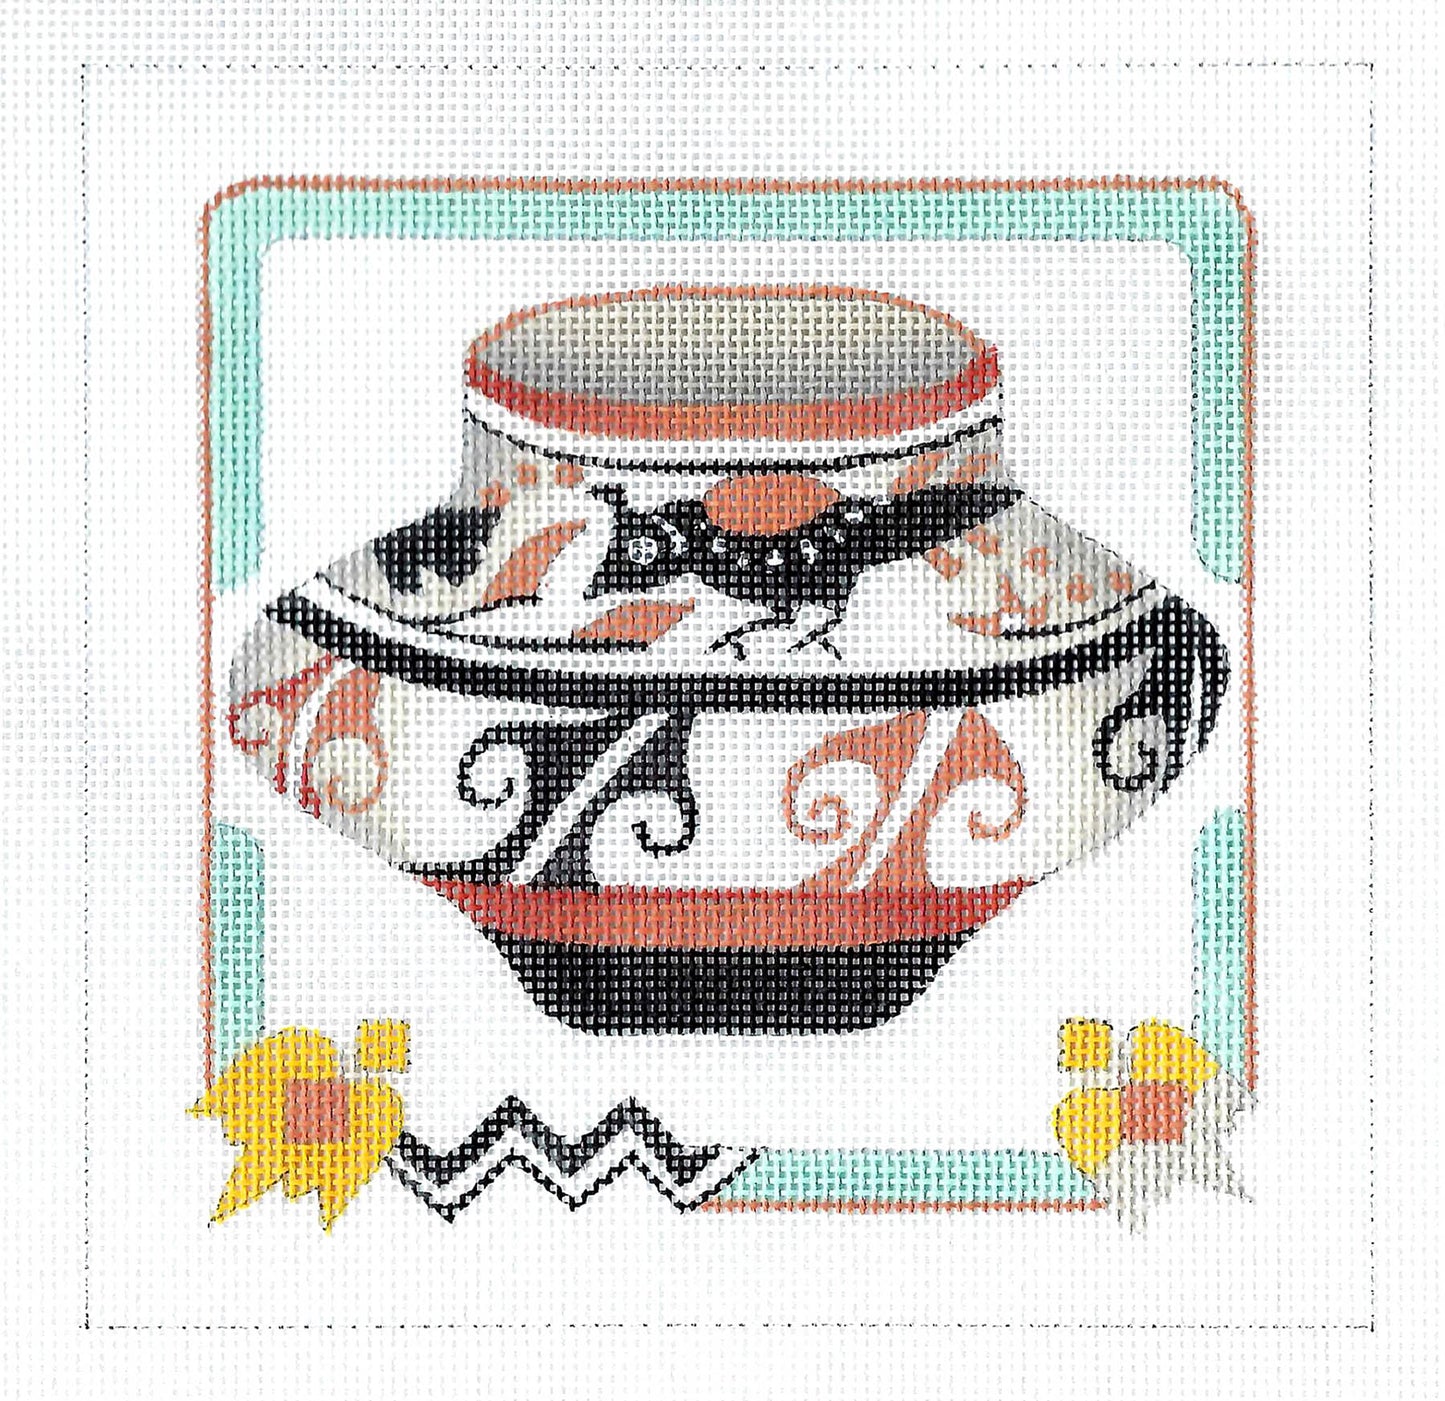 Southwest ~ Quail Pot with Southwestern Border handpainted Needlepoint Canvas by Jinice from Danji